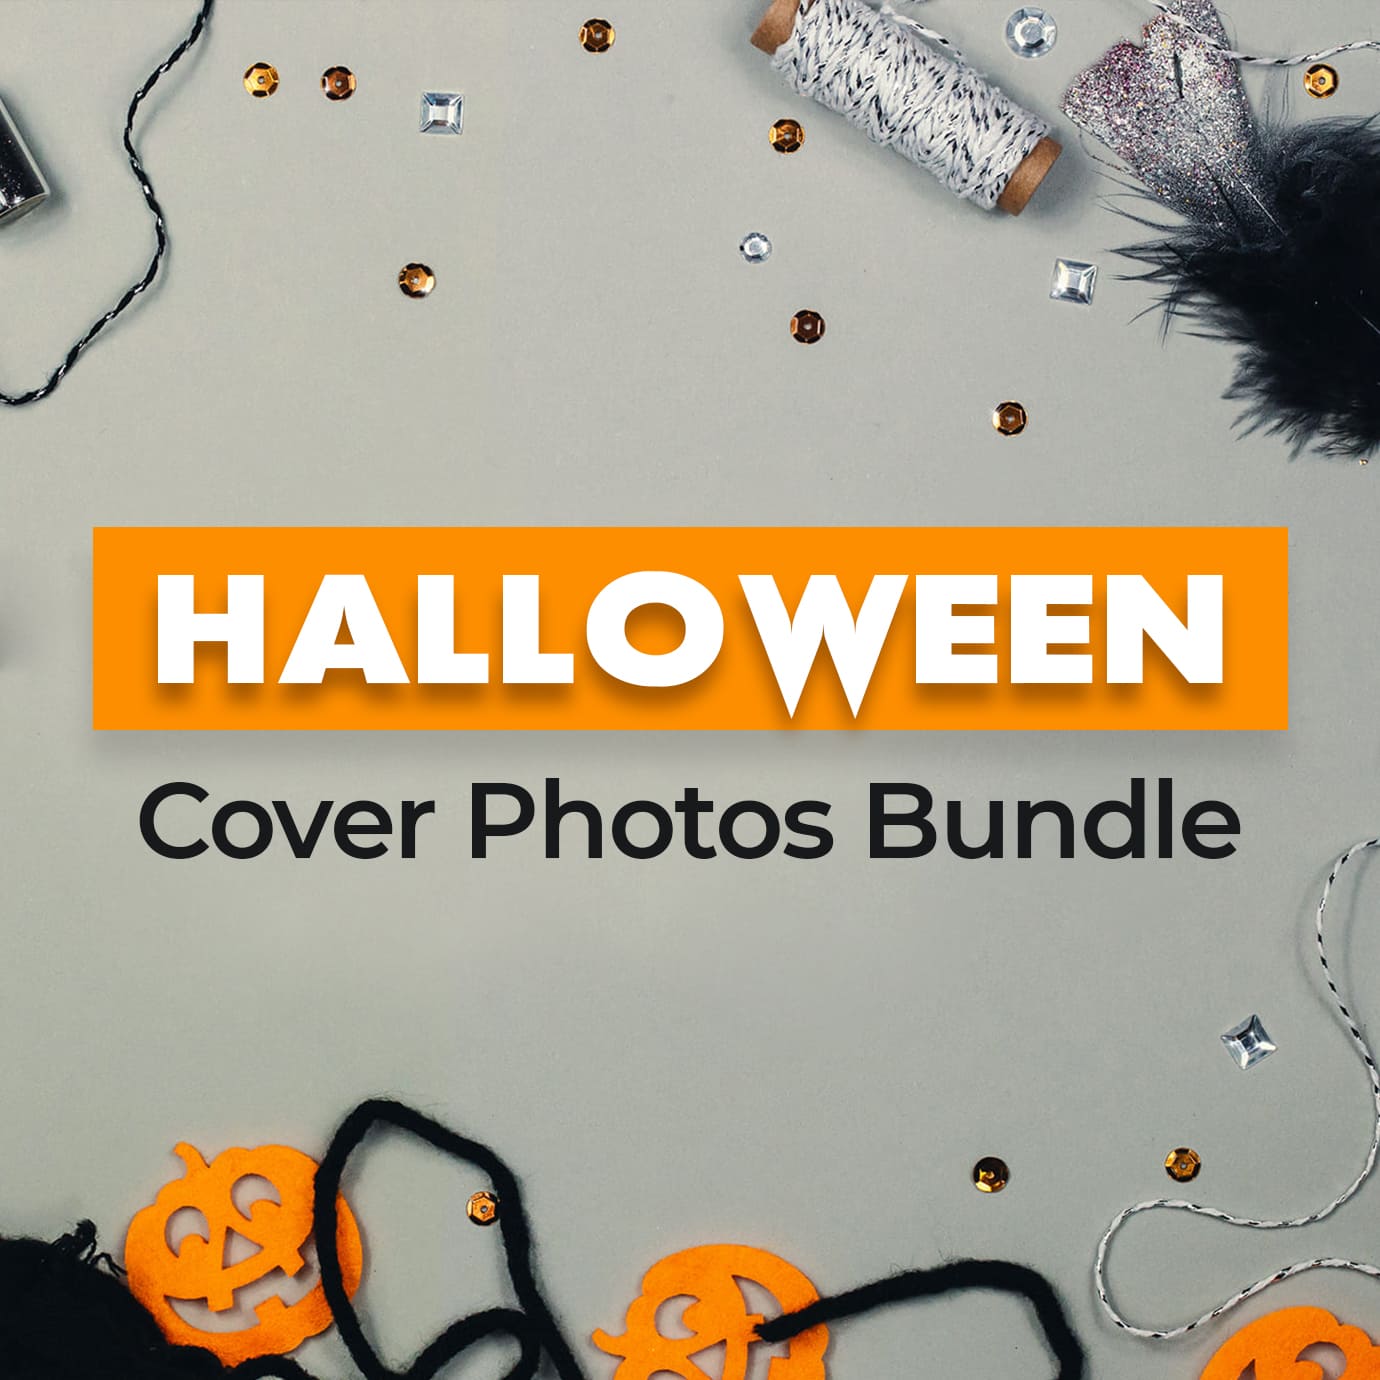 Halloween Cover Photos. Silvery threads, pumpkin figurines and sparkles on a gray background.